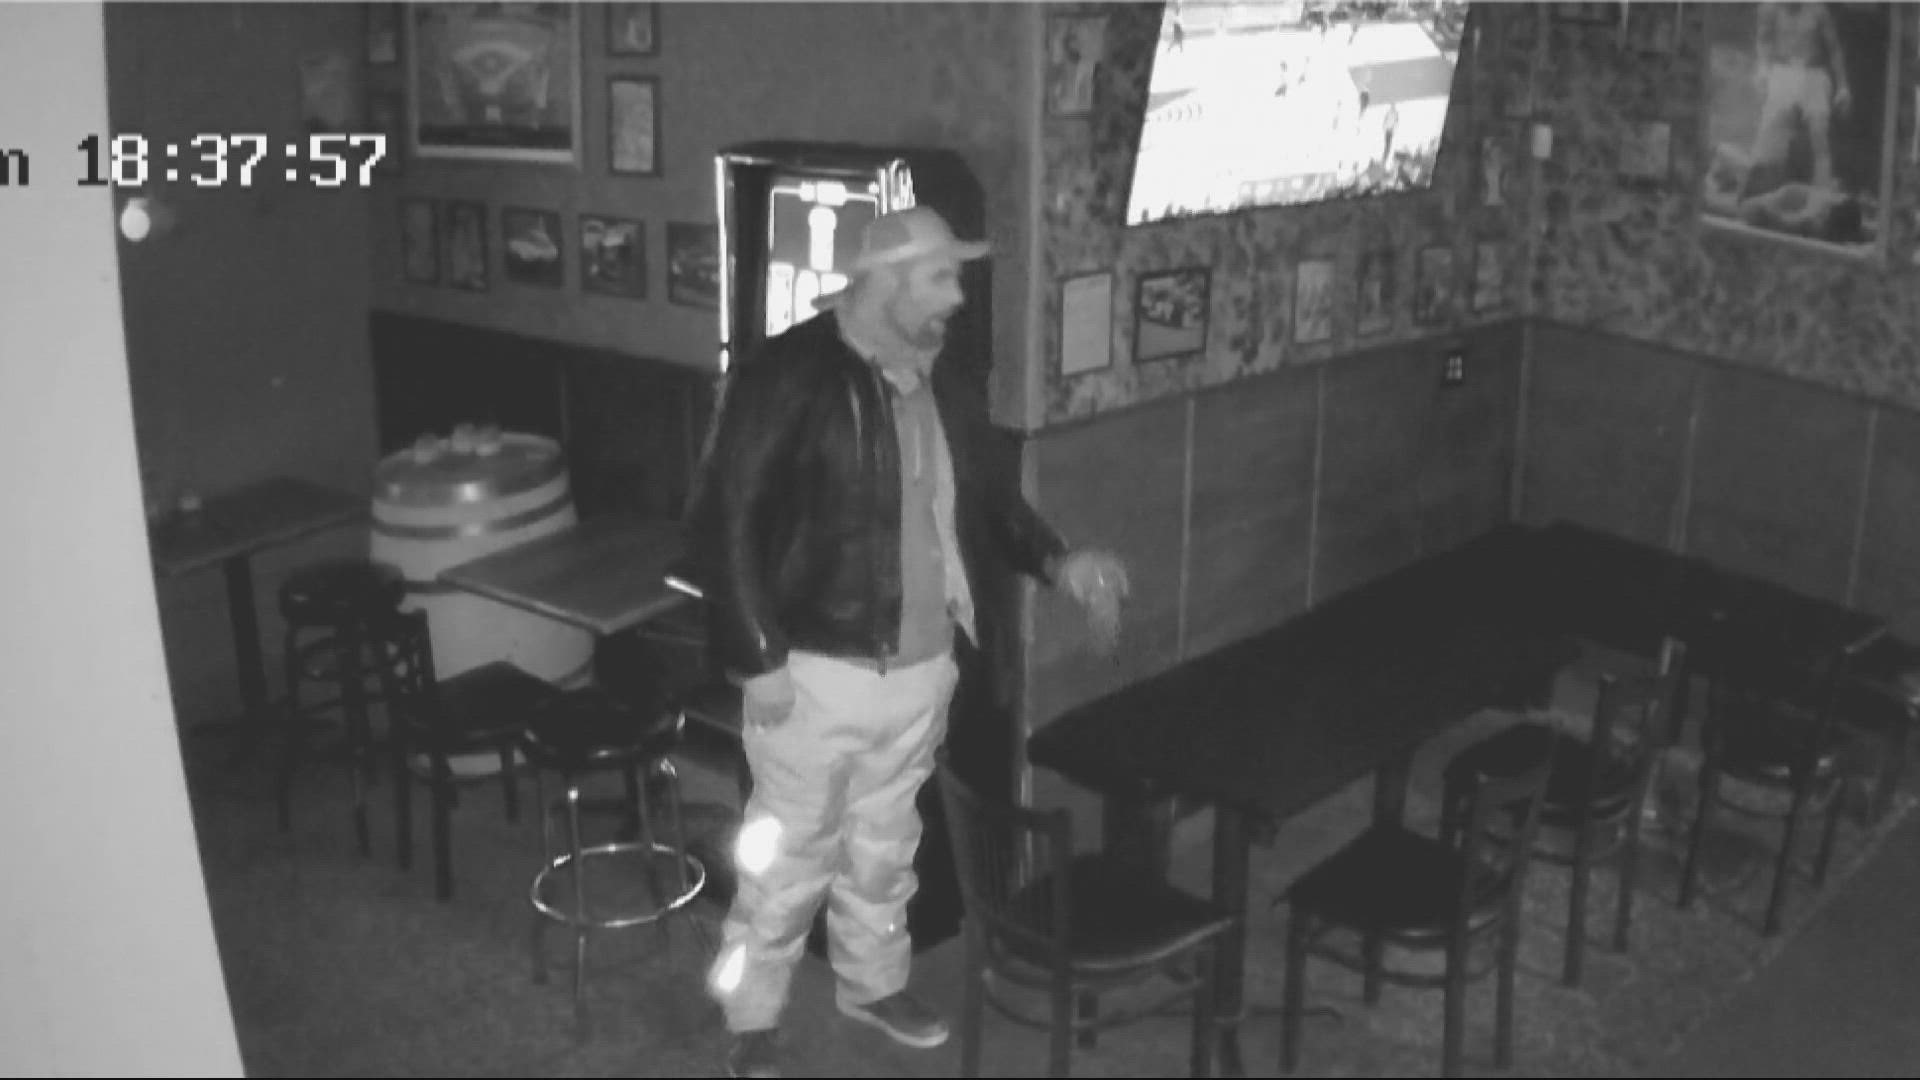 Nick Peck said the man who broke into his bar stole money from the ATM and booze to the tune of $5,000-$6,000 dollars lost.